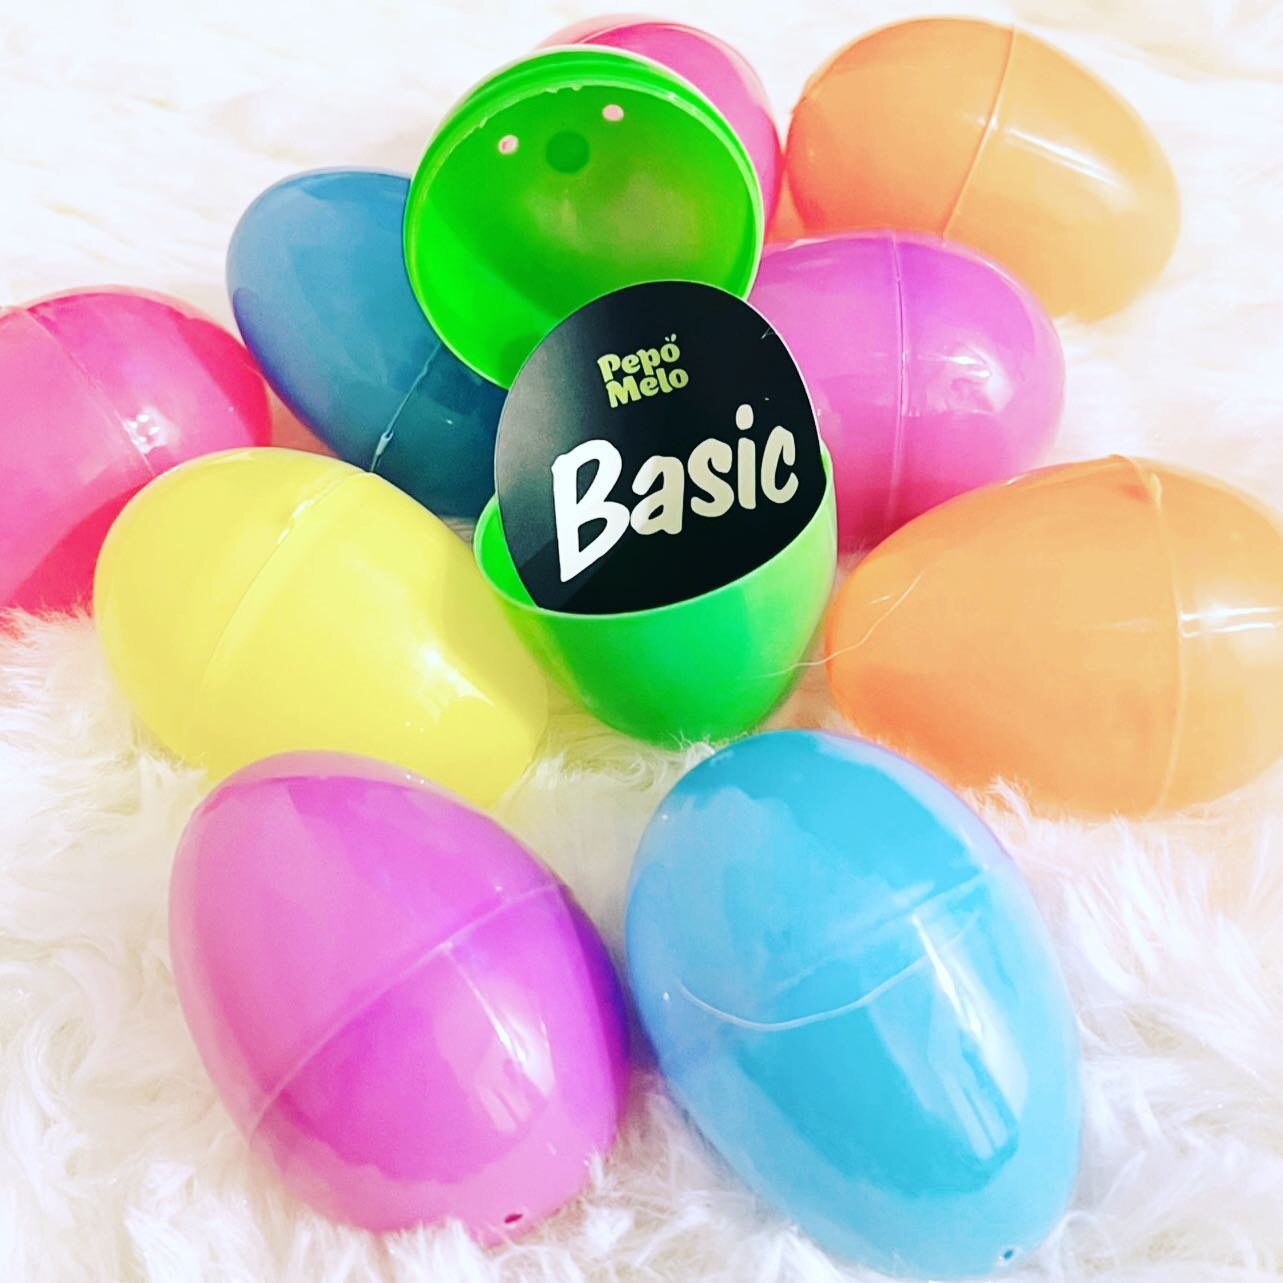 I&rsquo;m pretty sure Easter Sunday is all about the egg hunt.  Well if it isn&rsquo;t it is this time!!
#gameon 

3 green eggs will be hidden amongst other eggs.  Be the first to find the egg(s) and you&rsquo;ll get one of our very hard to get reusa